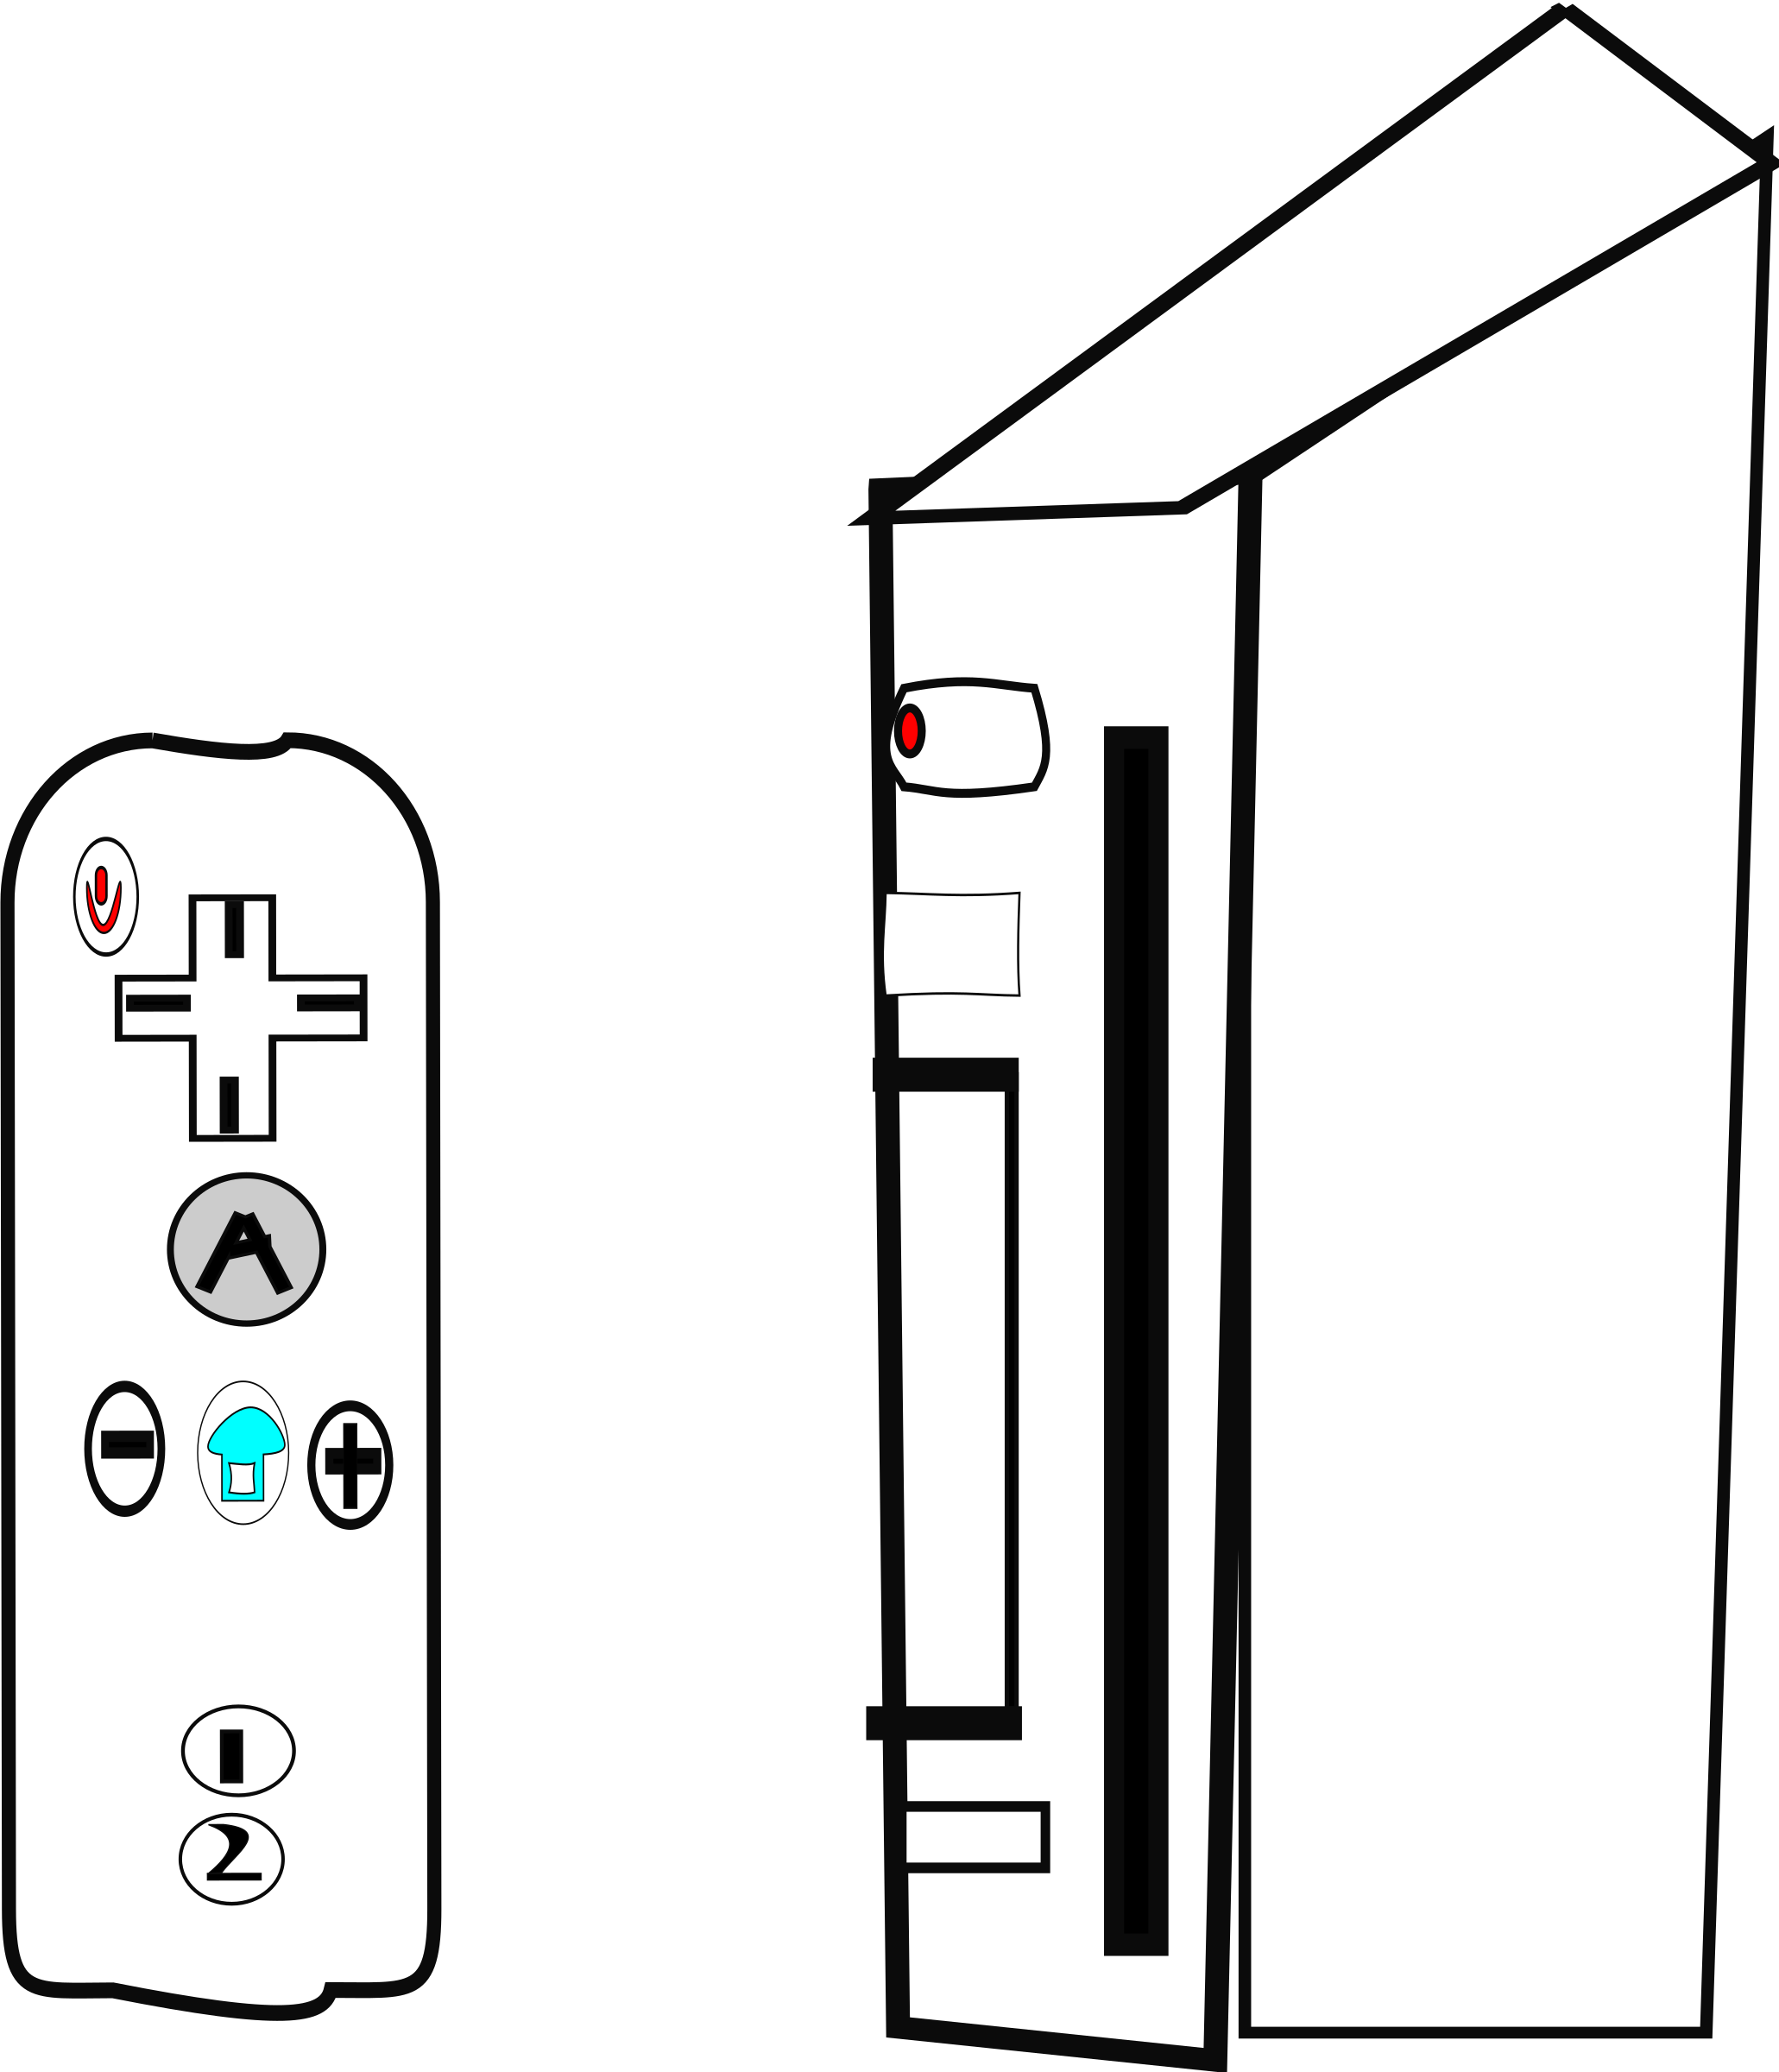 Nintendo Wii By Peterbrough